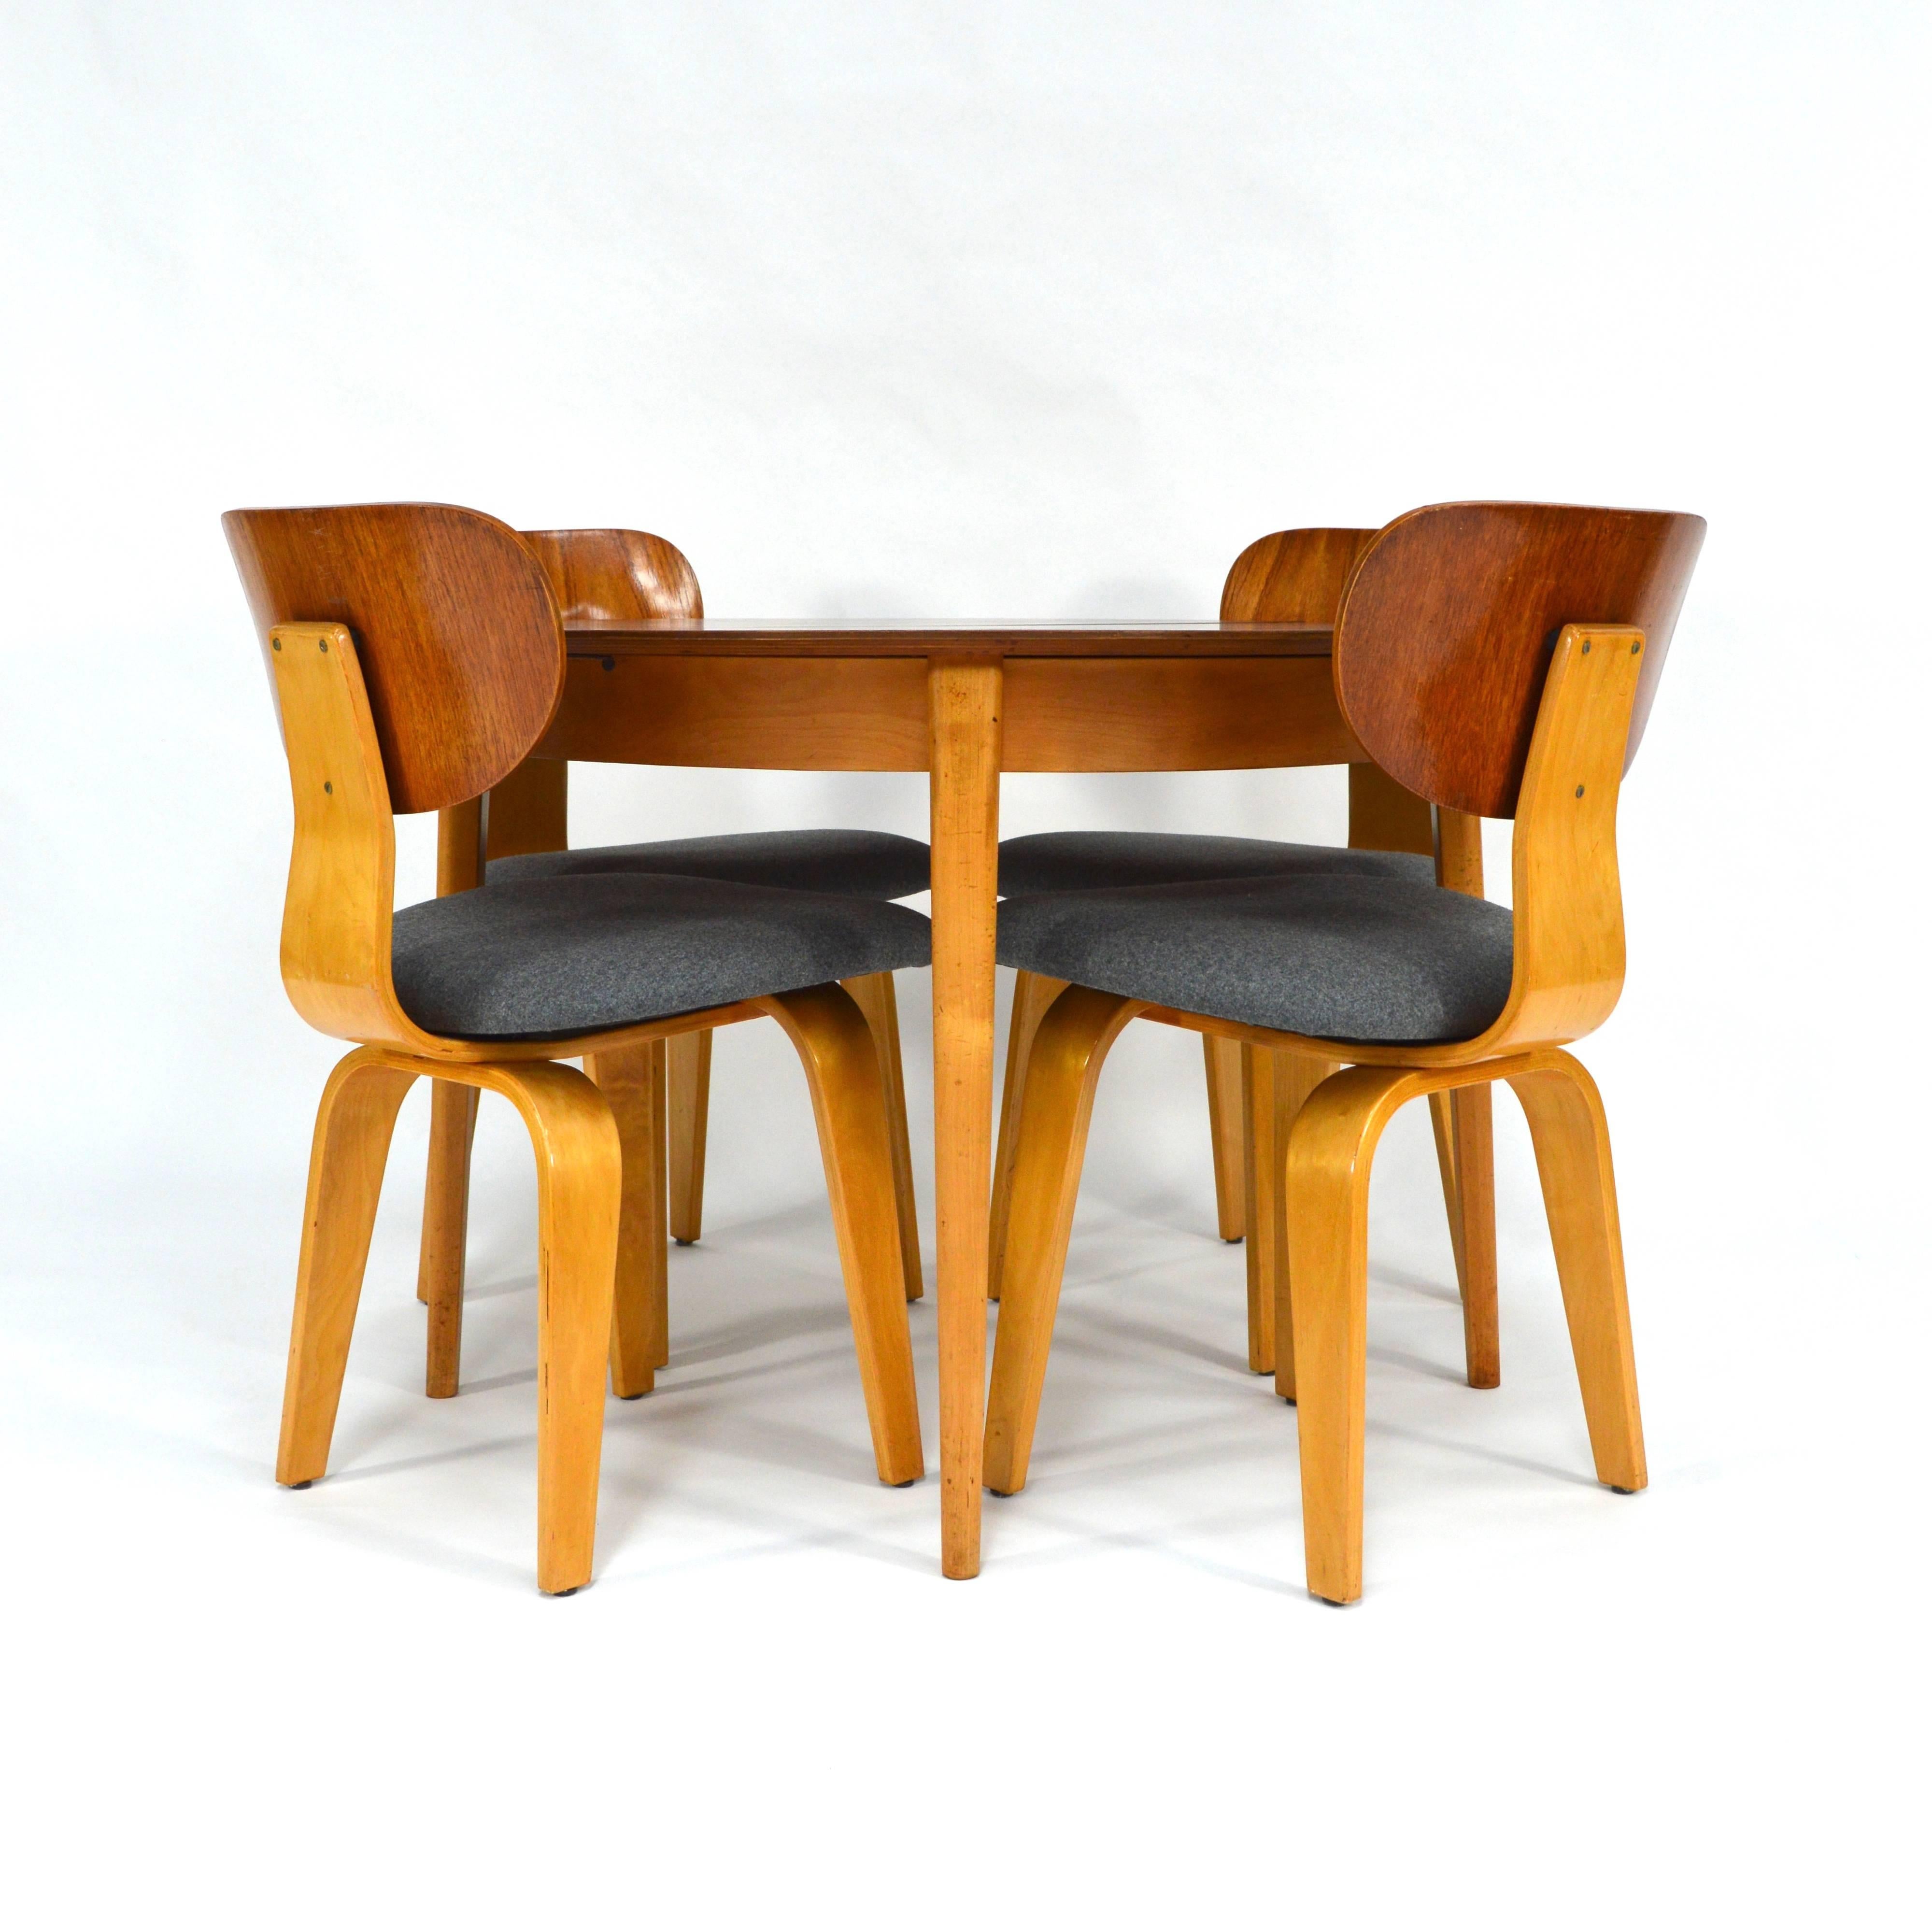 Extendable round dining se made in birch and teak plywood.
Table model TB05 (teak top with birch base).
Chairs model SB02 (teak backrest with birch spine and leg's).
The chairs have been reupholstered with a beautiful grey fabric.
The set is in